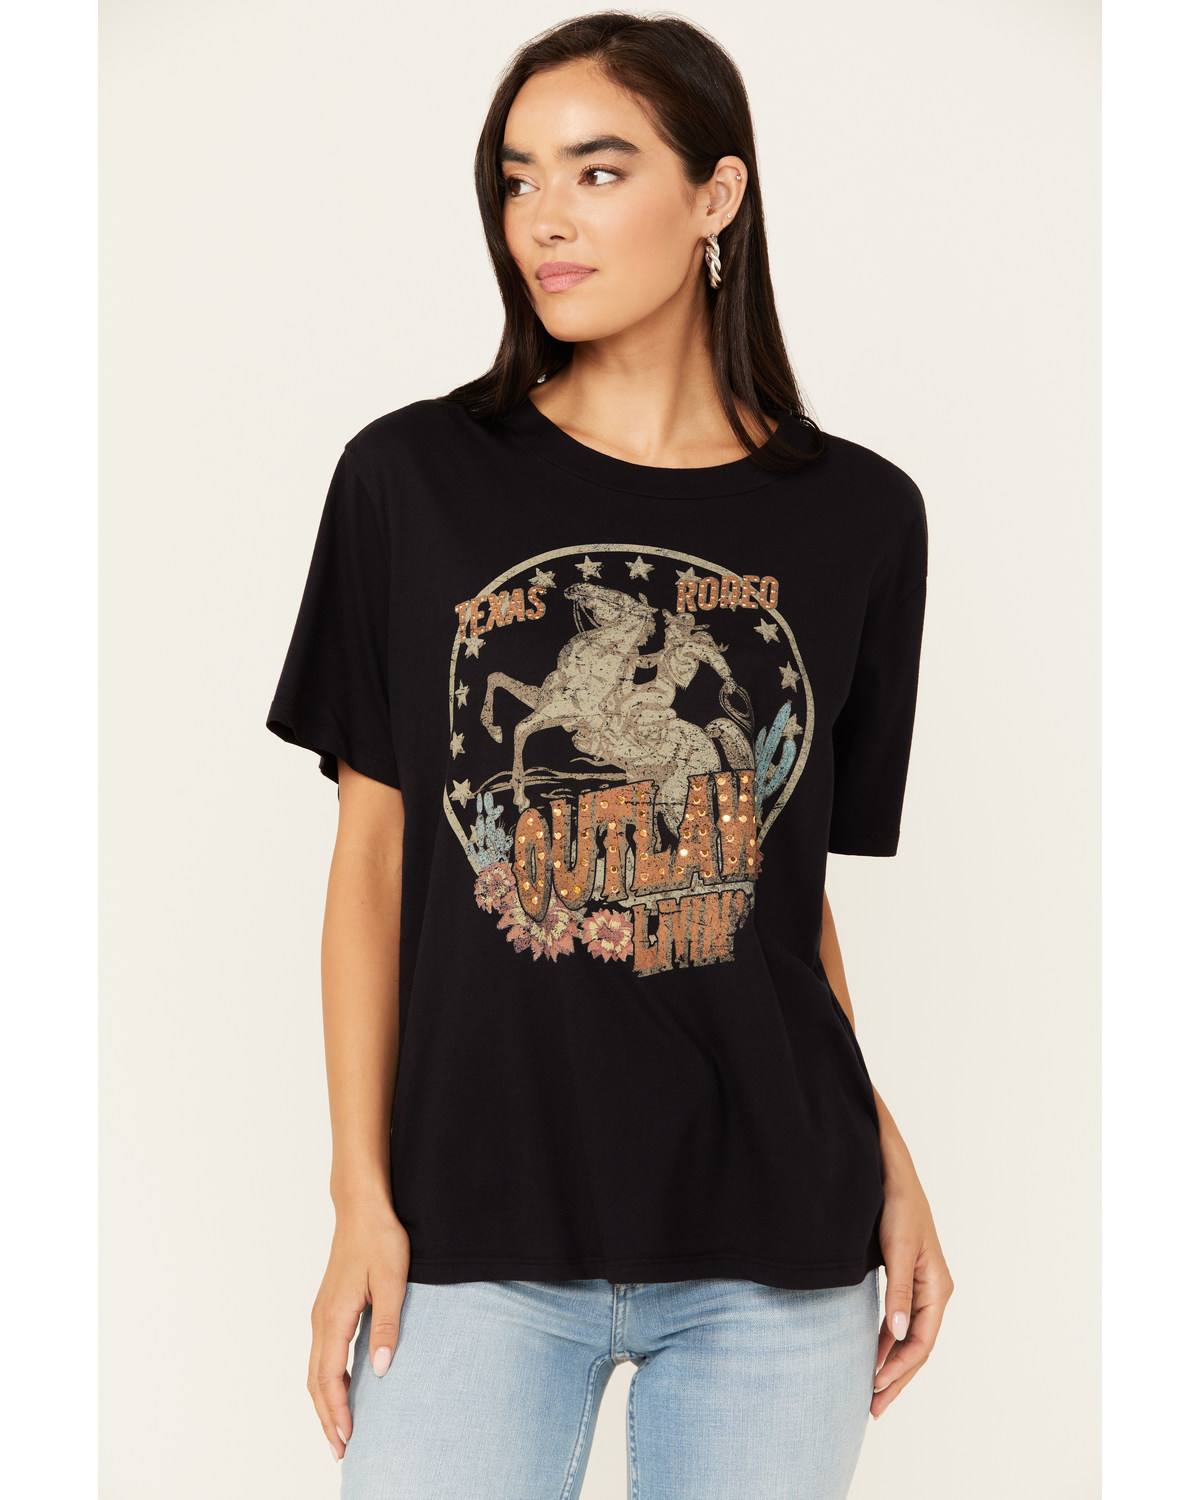 Idyllwind Women's Outlaw Livin' Short Sleeve Graphic Tee